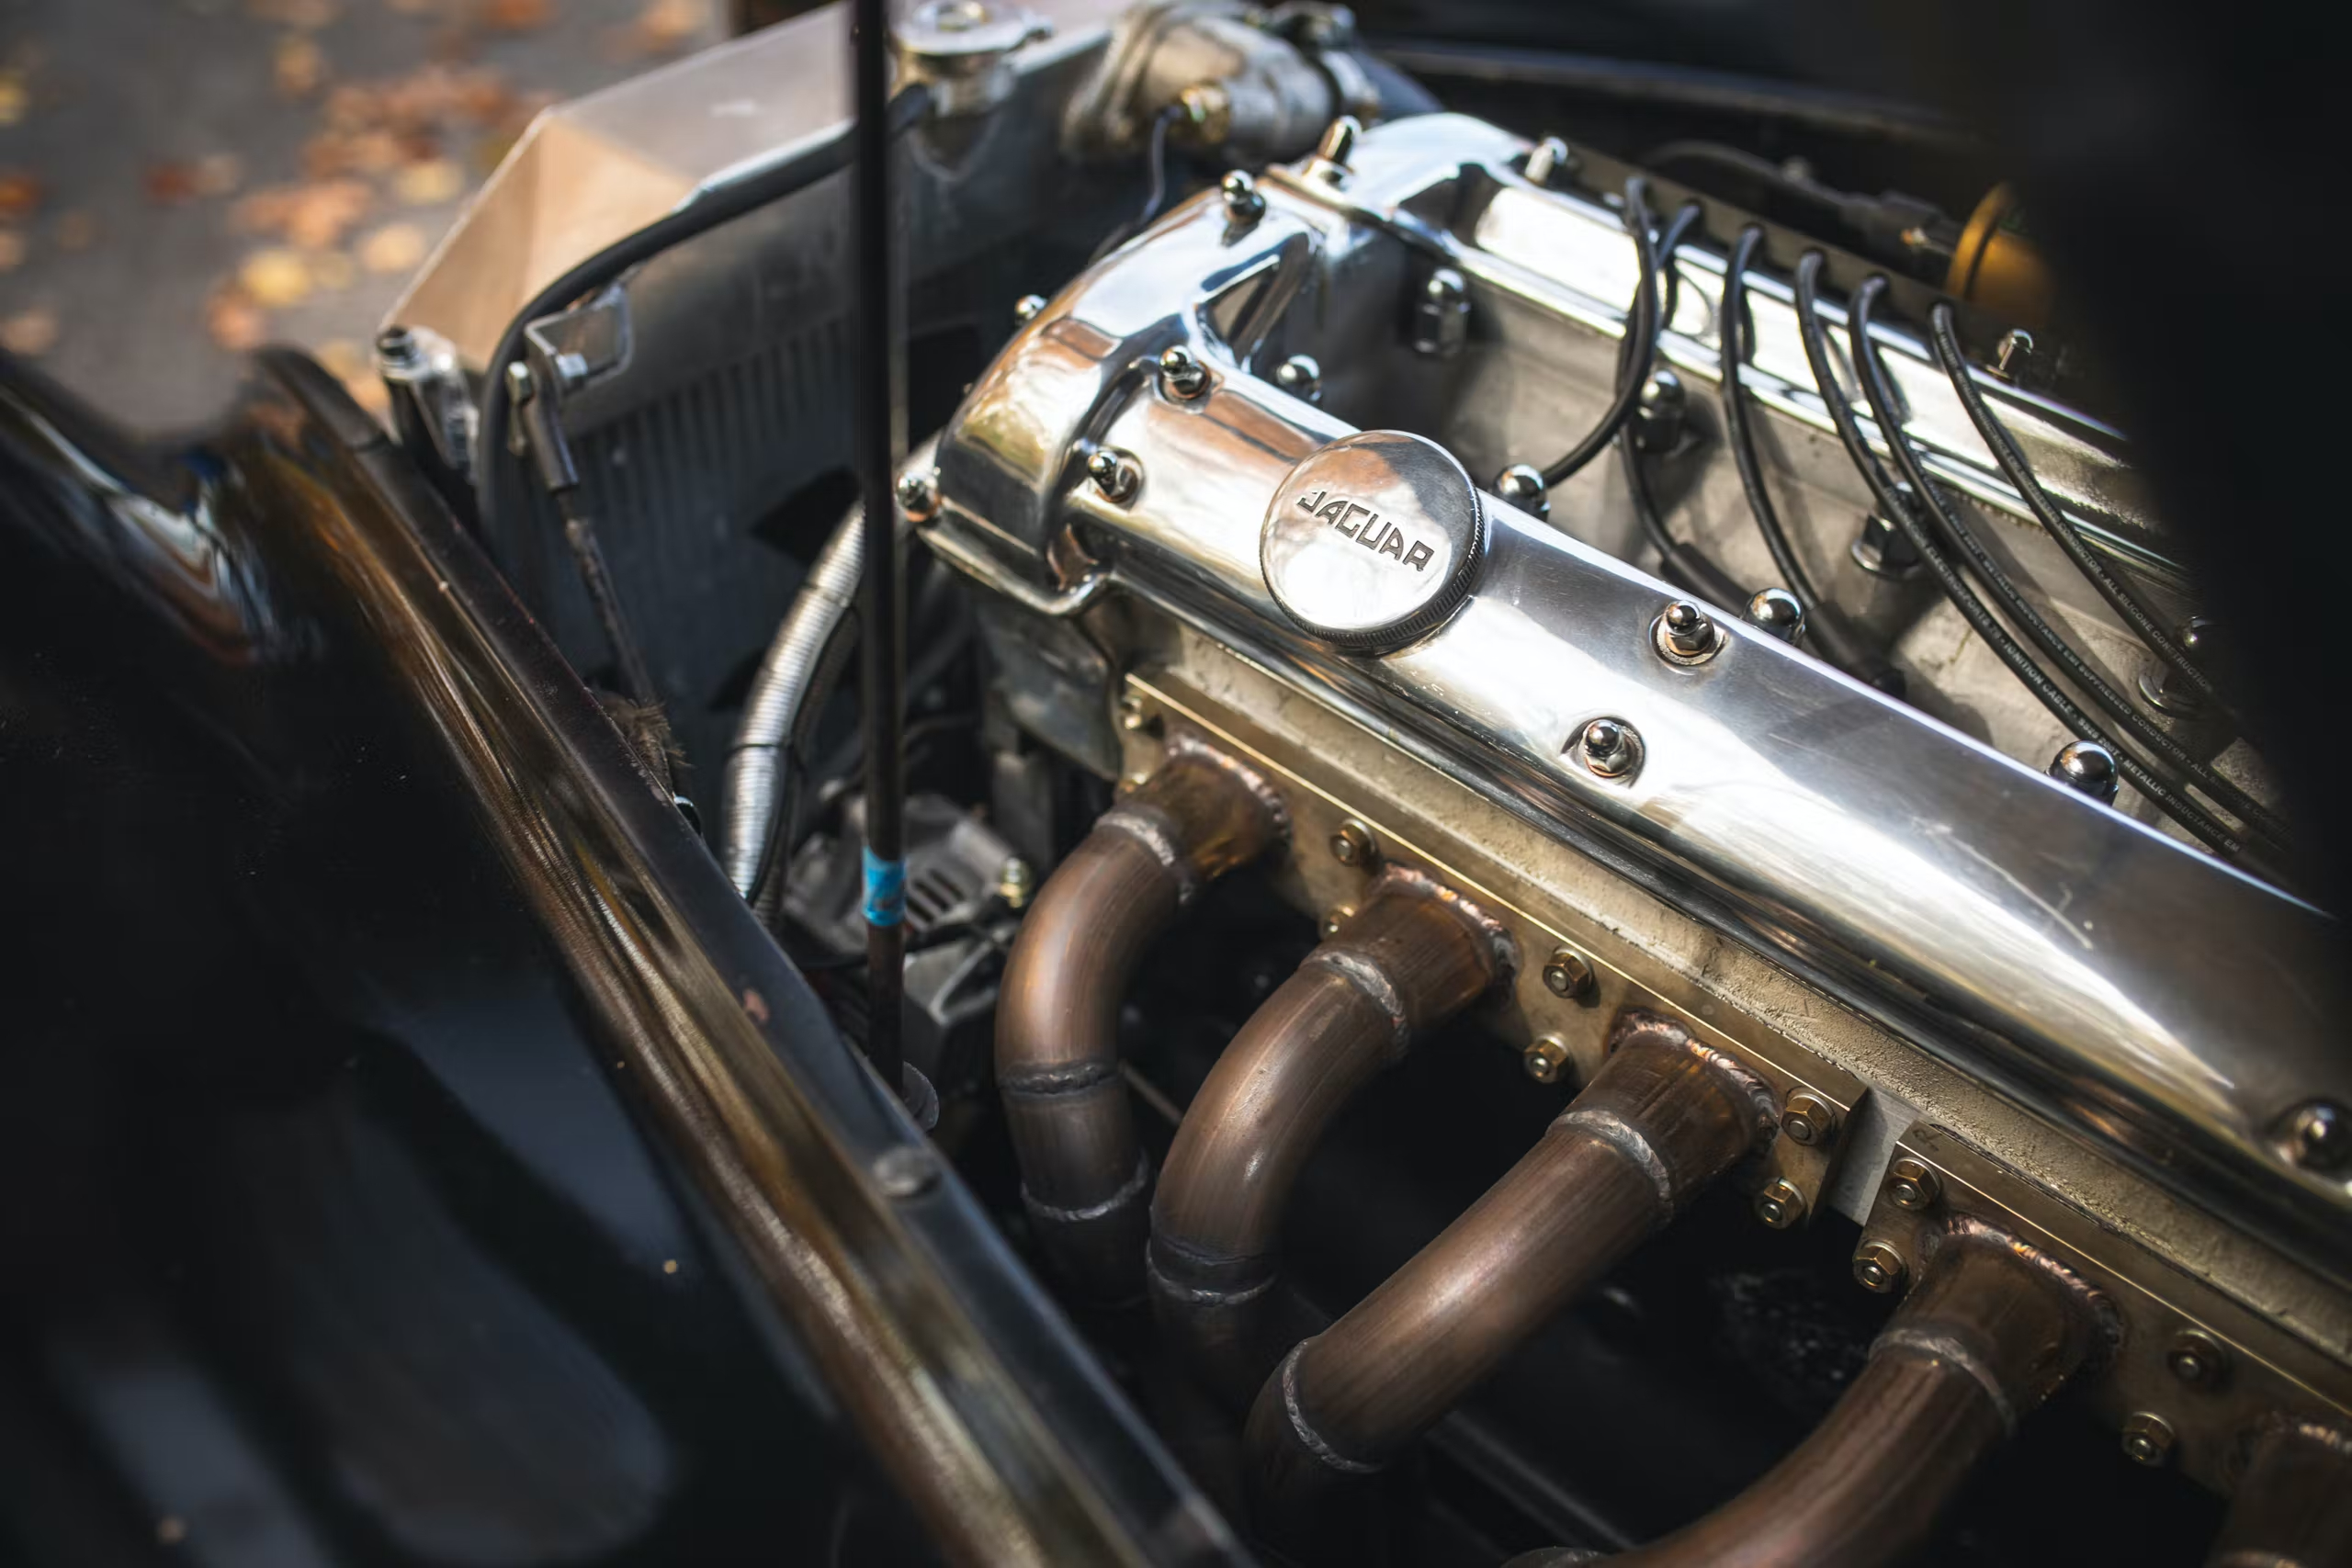 The joy of six: The engine that made Jaguar